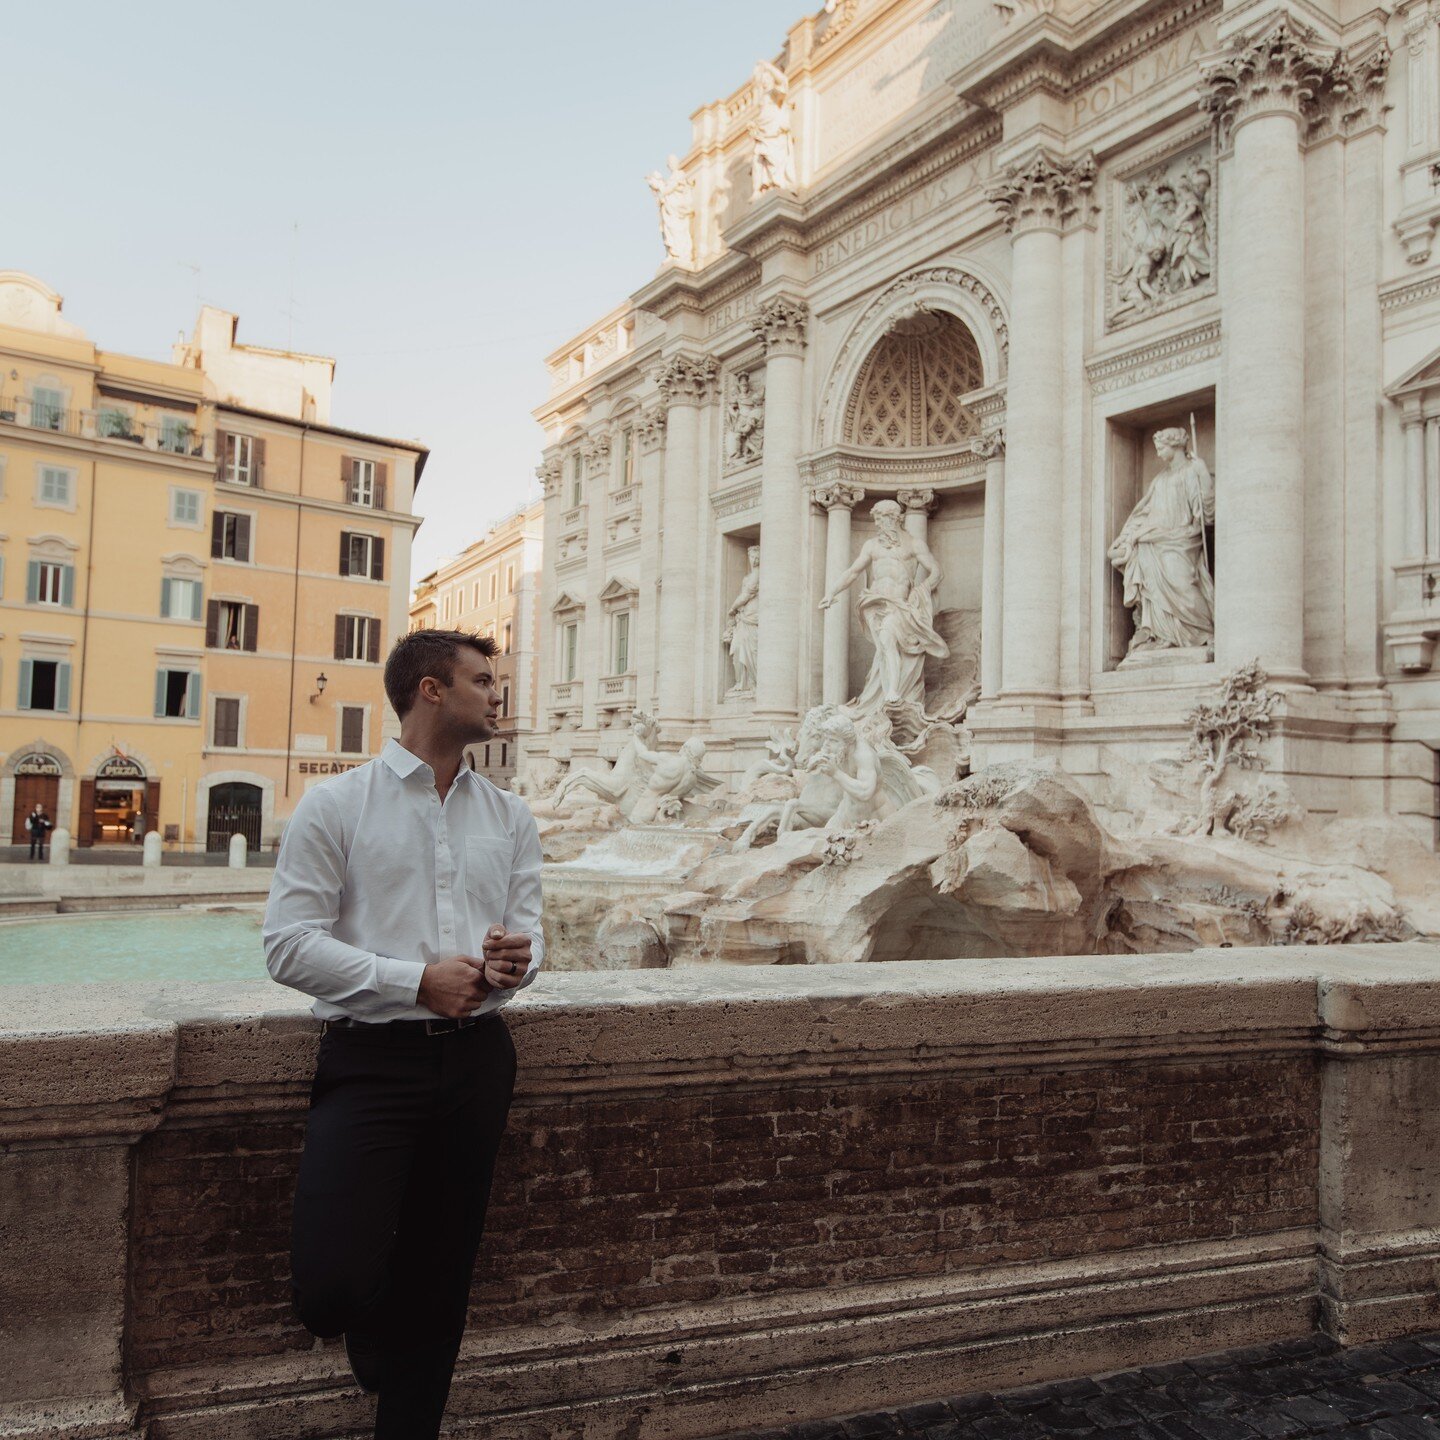 When in Rome, do as the Romans do...solo travel! 🌍✈️💼 I've got a new blog post up on my website with tips and tricks for all you fellow solo travelers out there. From getting TSA pre-check to traveling light, I've got you covered. And if you're loo